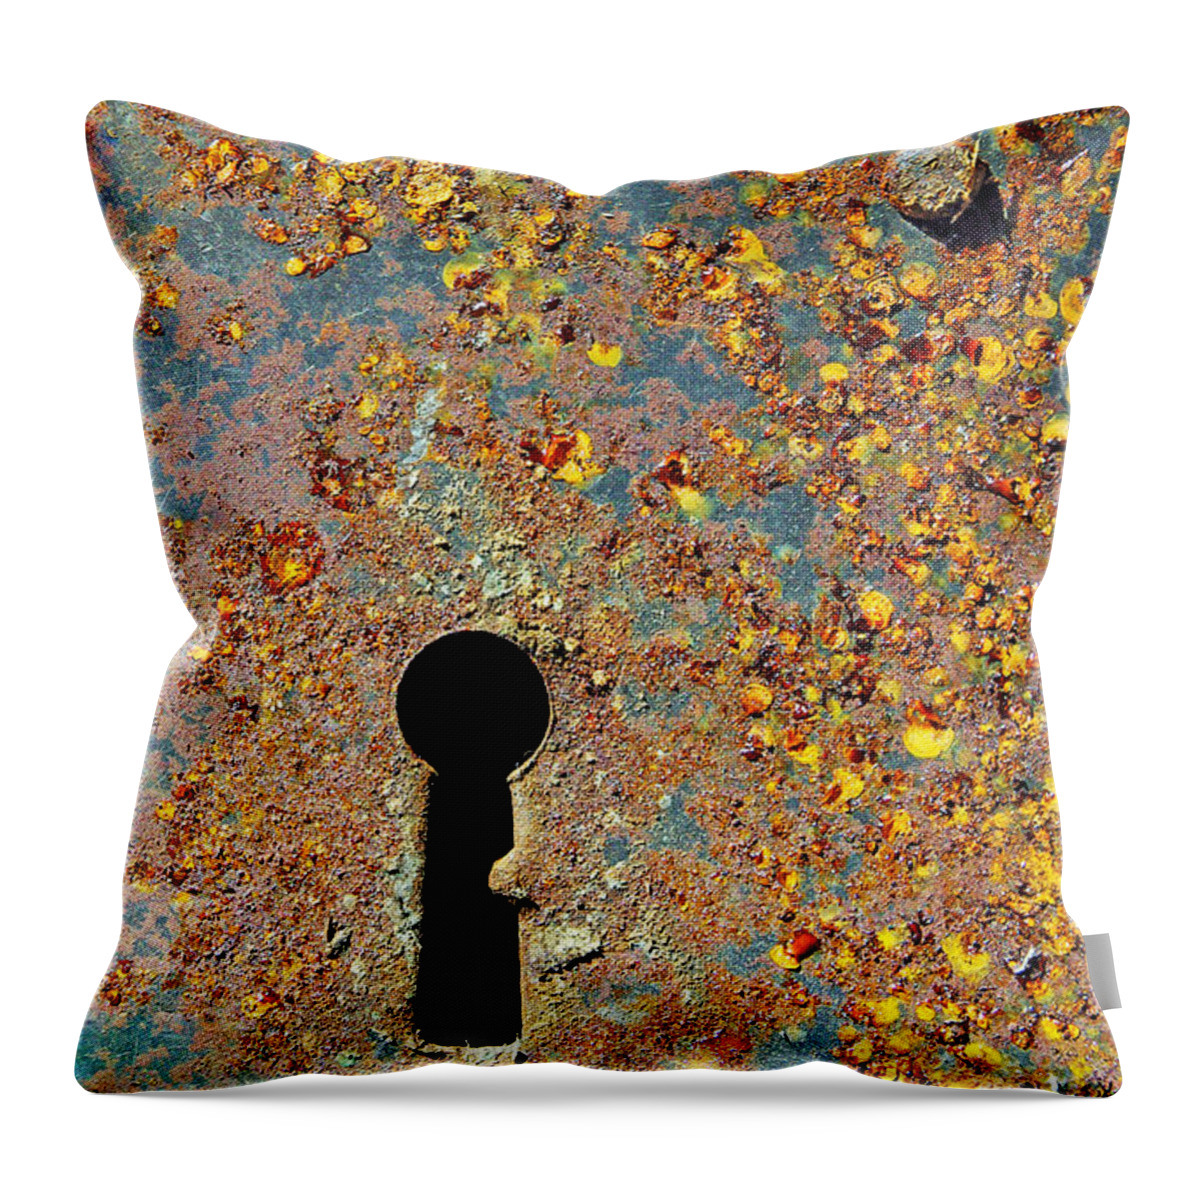 Abandoned Throw Pillow featuring the photograph Rusty key-hole by Carlos Caetano